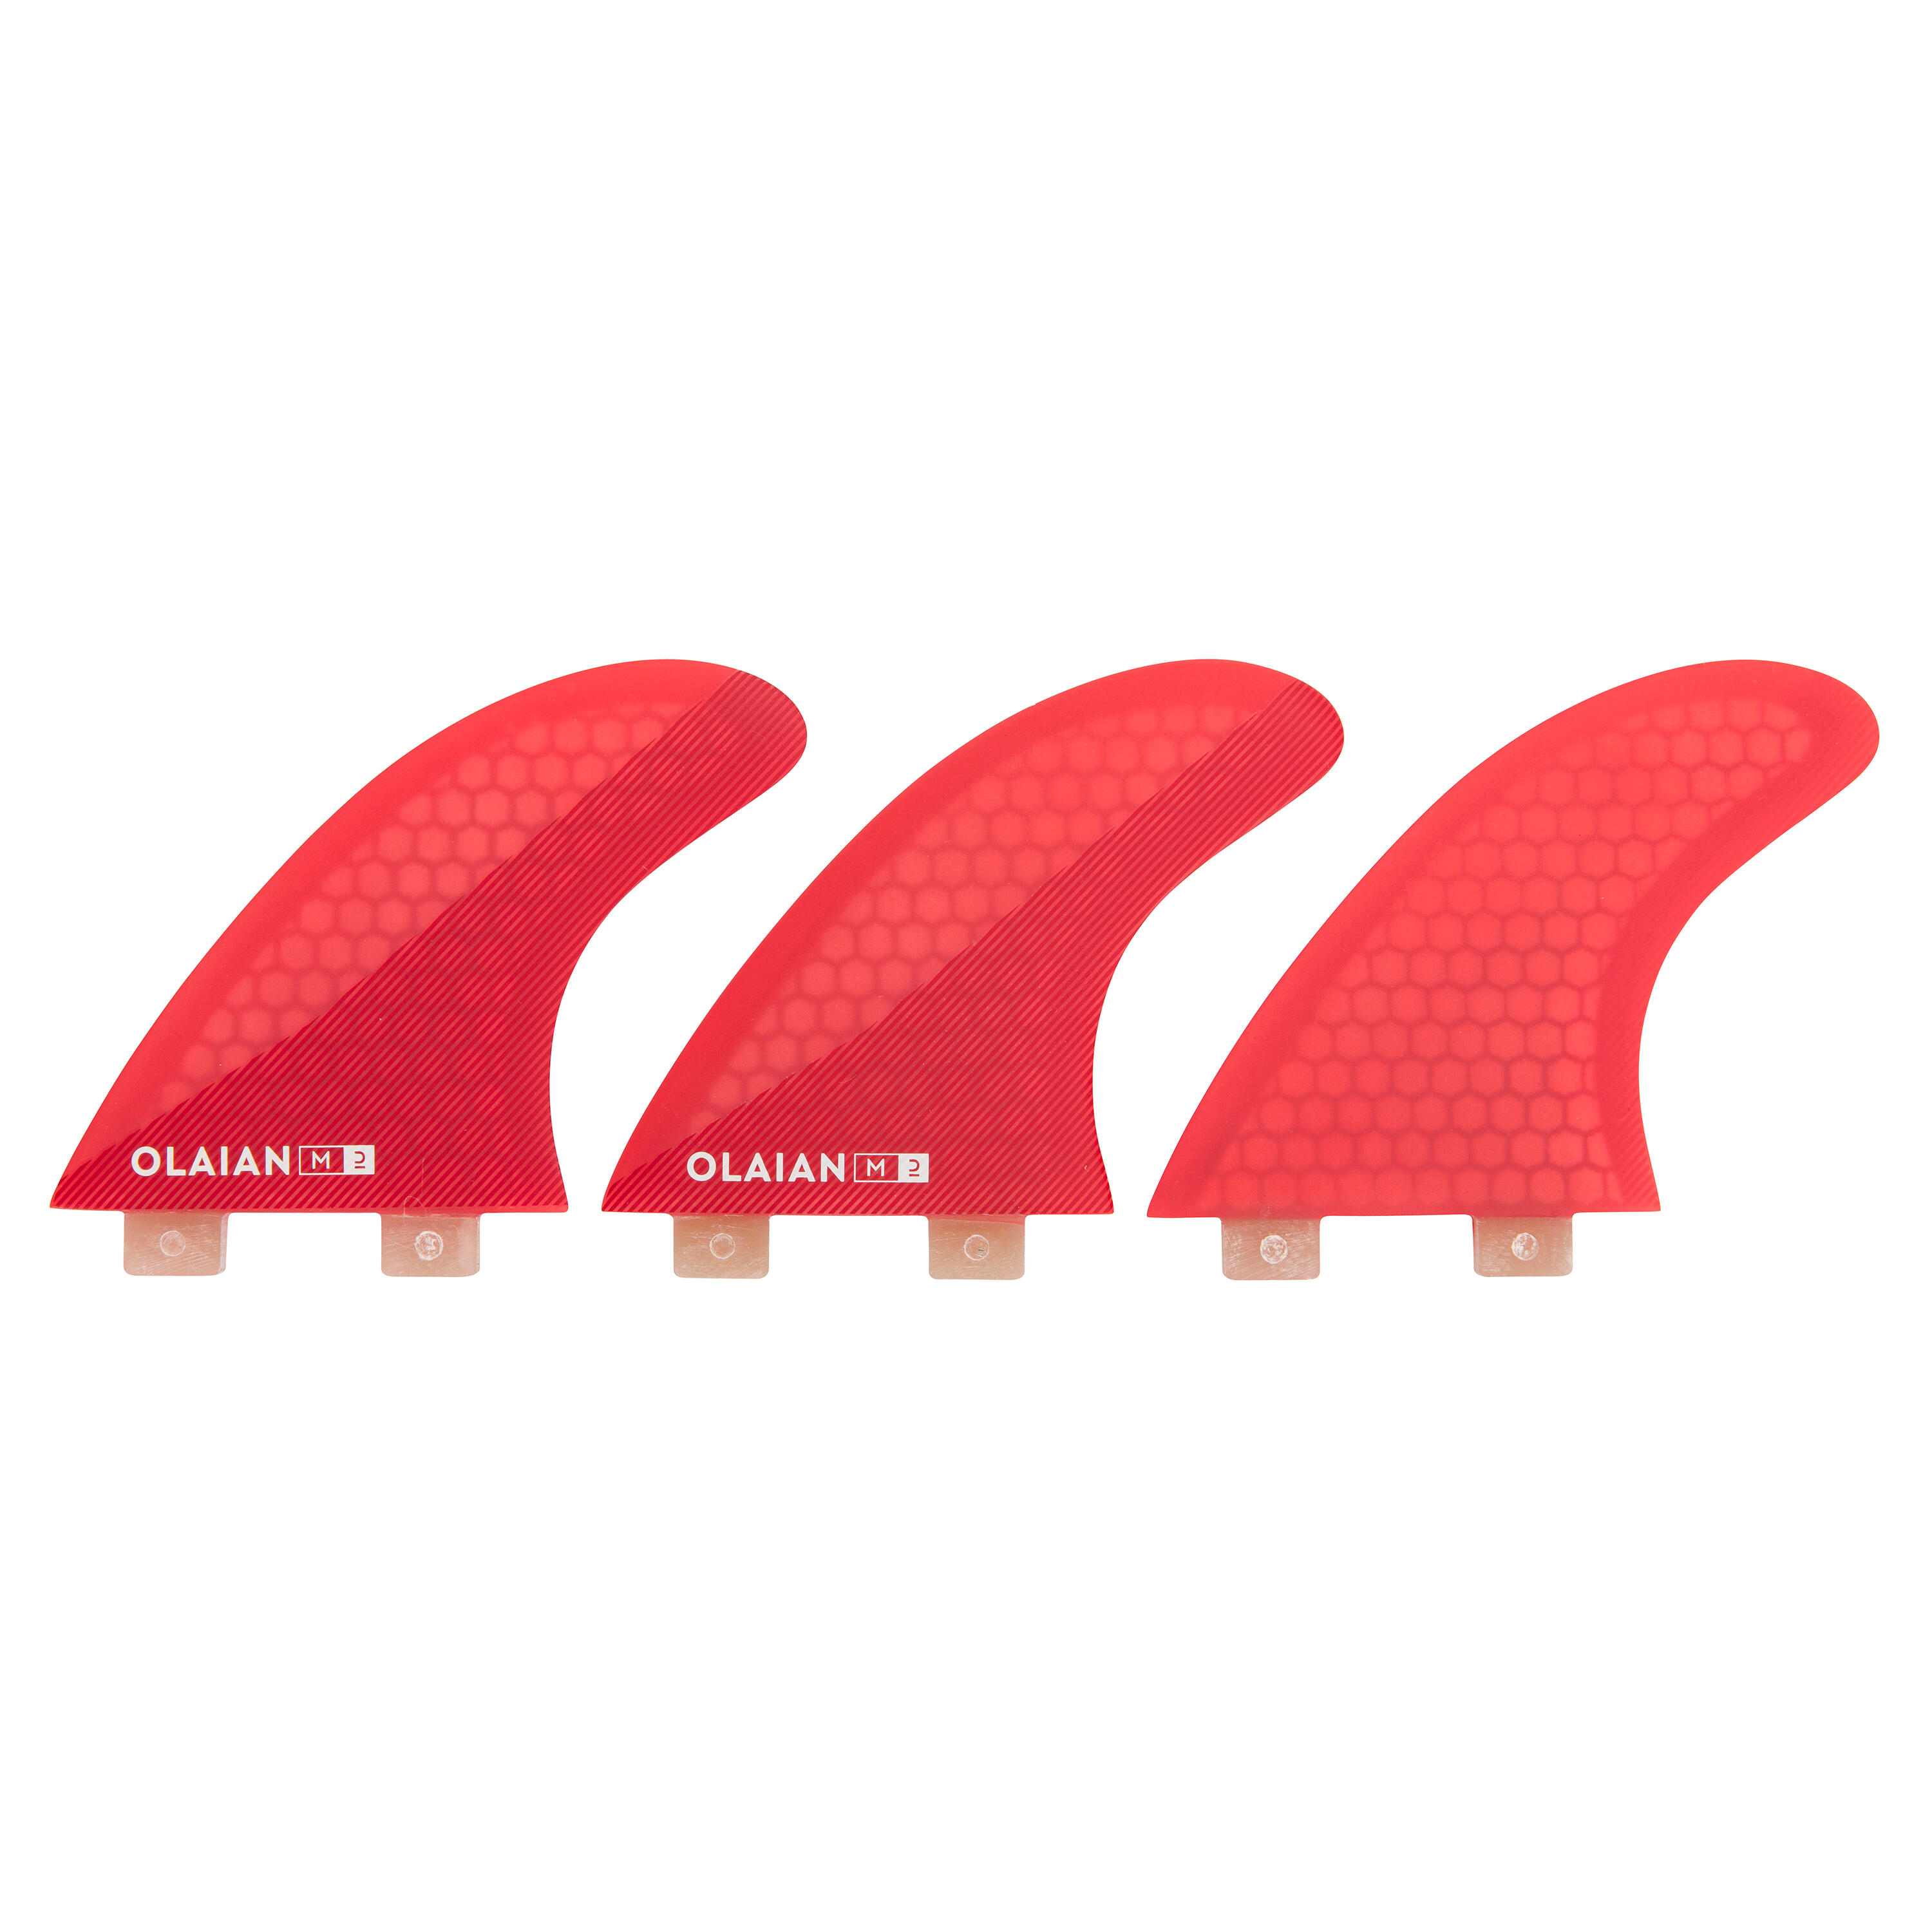 OLAIAN Three 900 4”5 composite fins for the FCS box